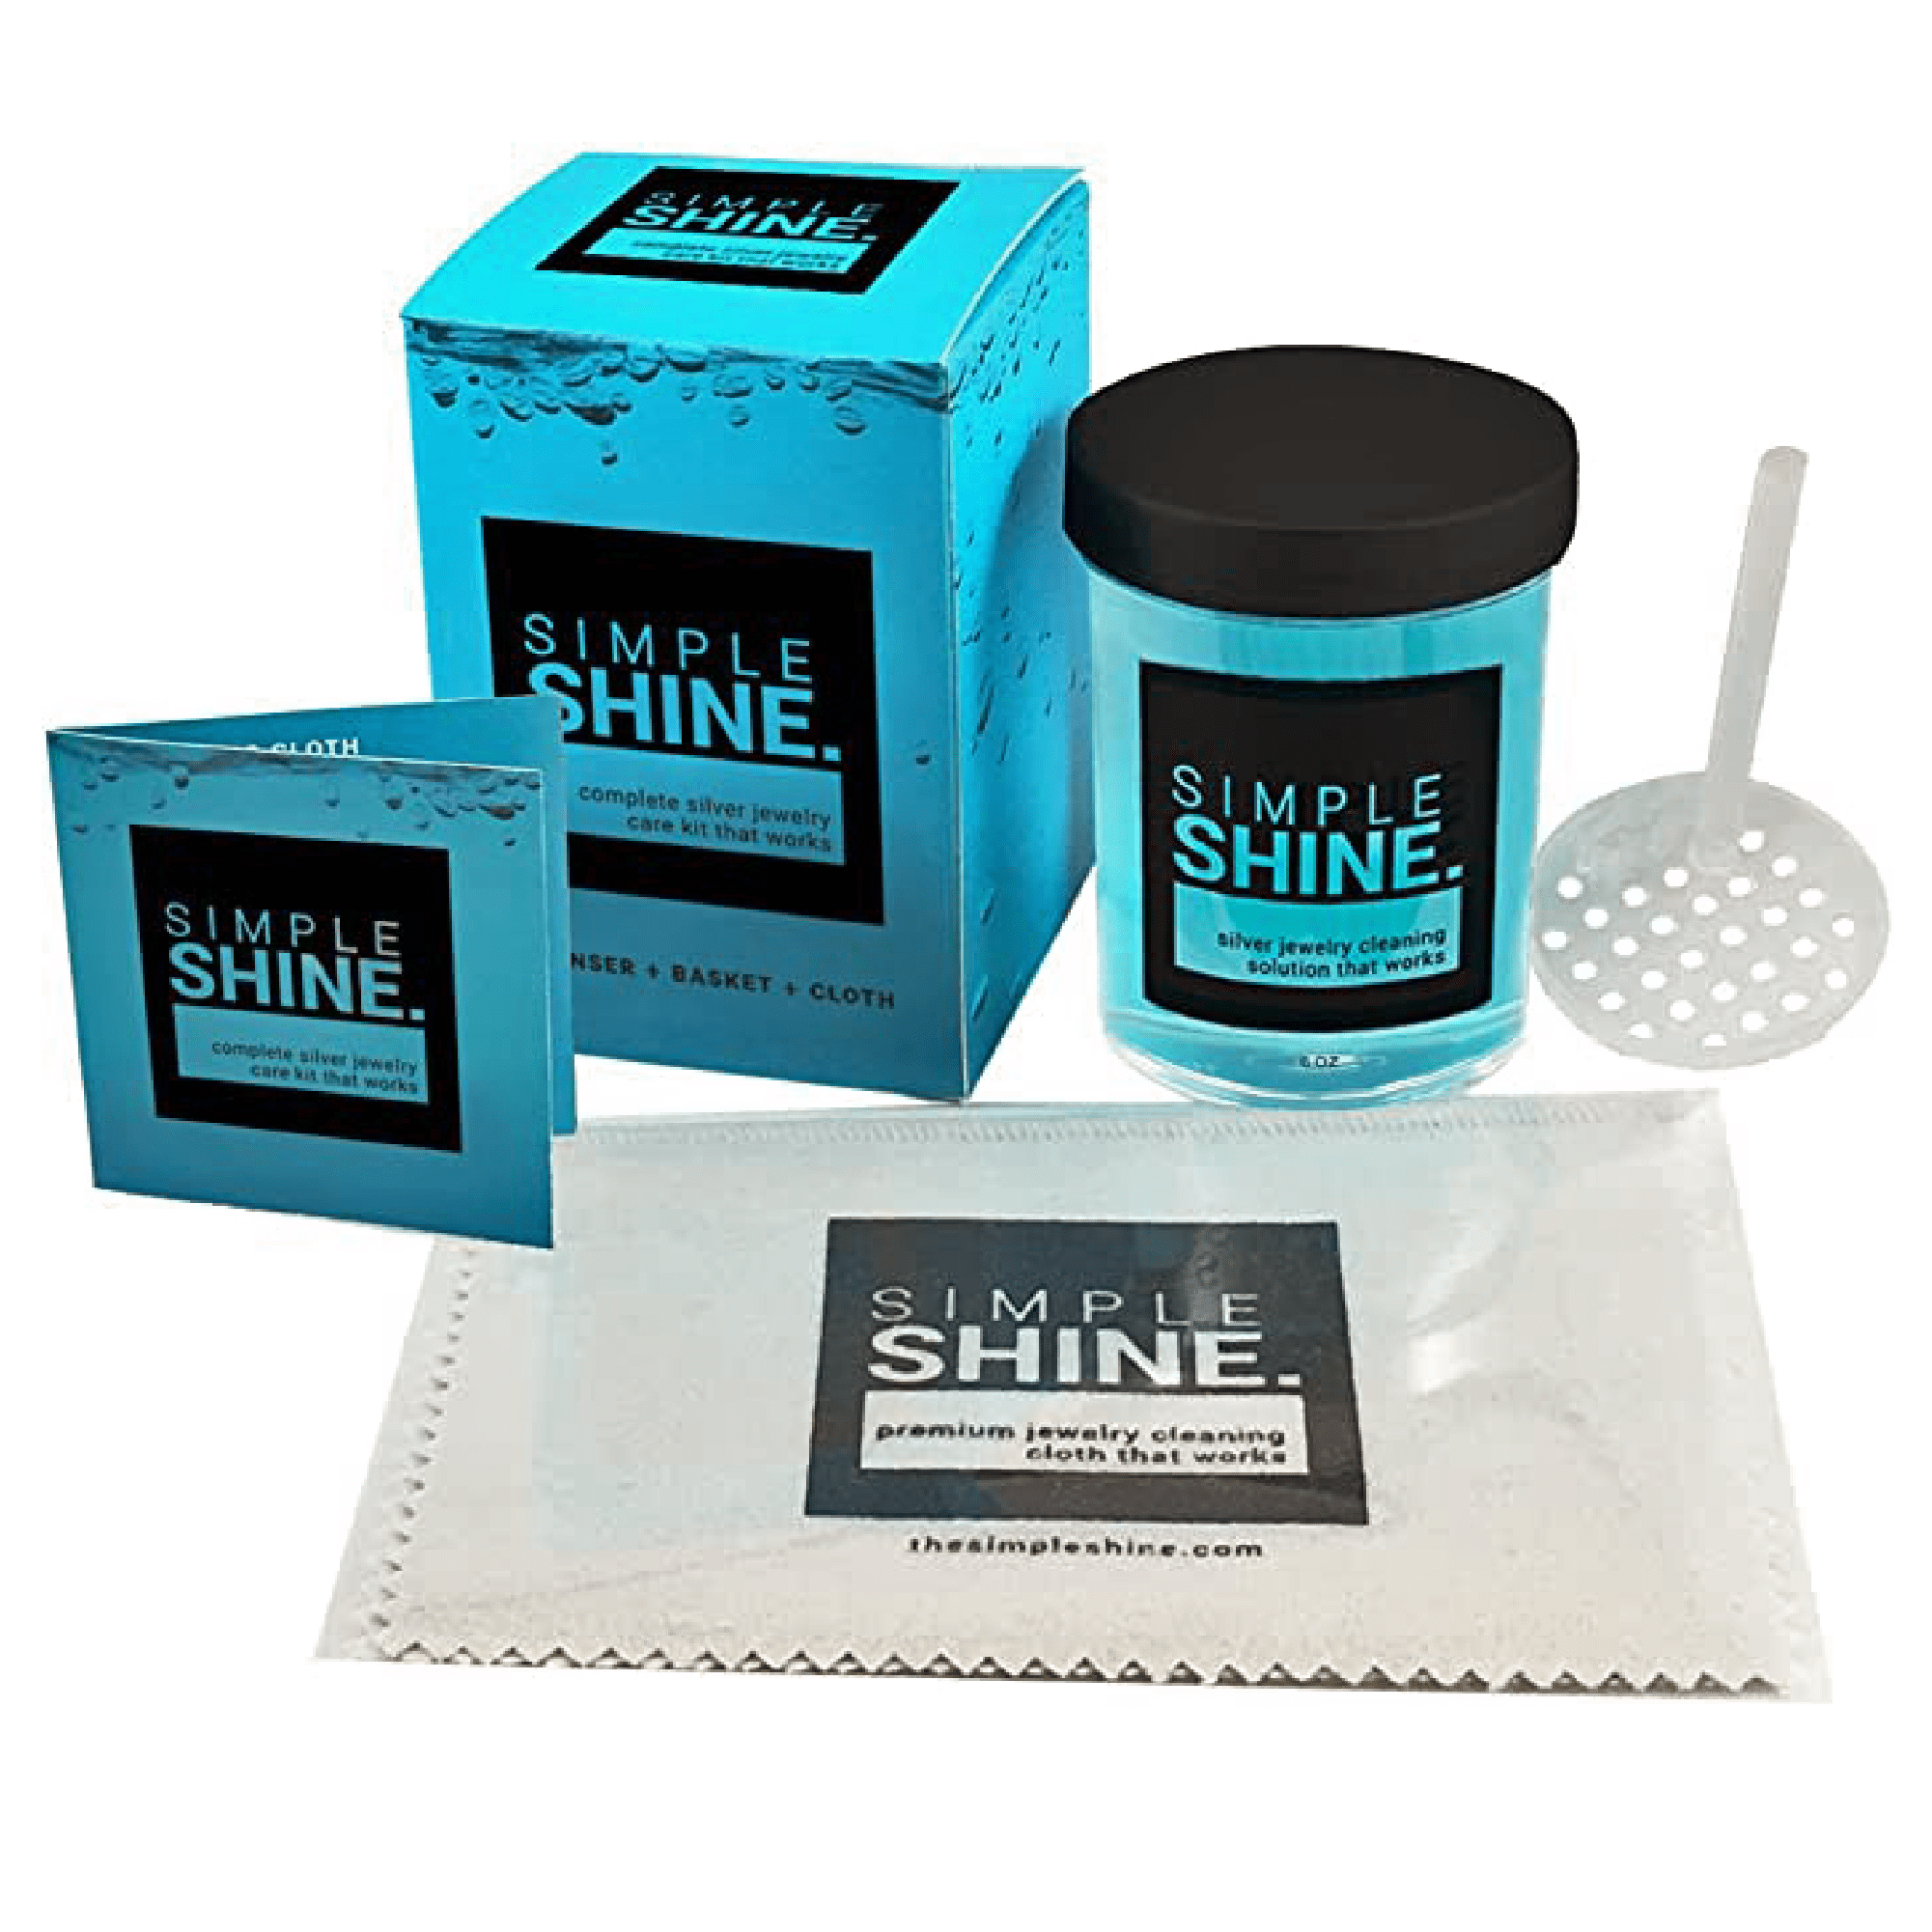 Complete Jewelry Cleaning Bundle Includes Gentle Jewelry Cleaner for All  Jewelry and Silver Jewelry Cleaner for Specialized Silver Care